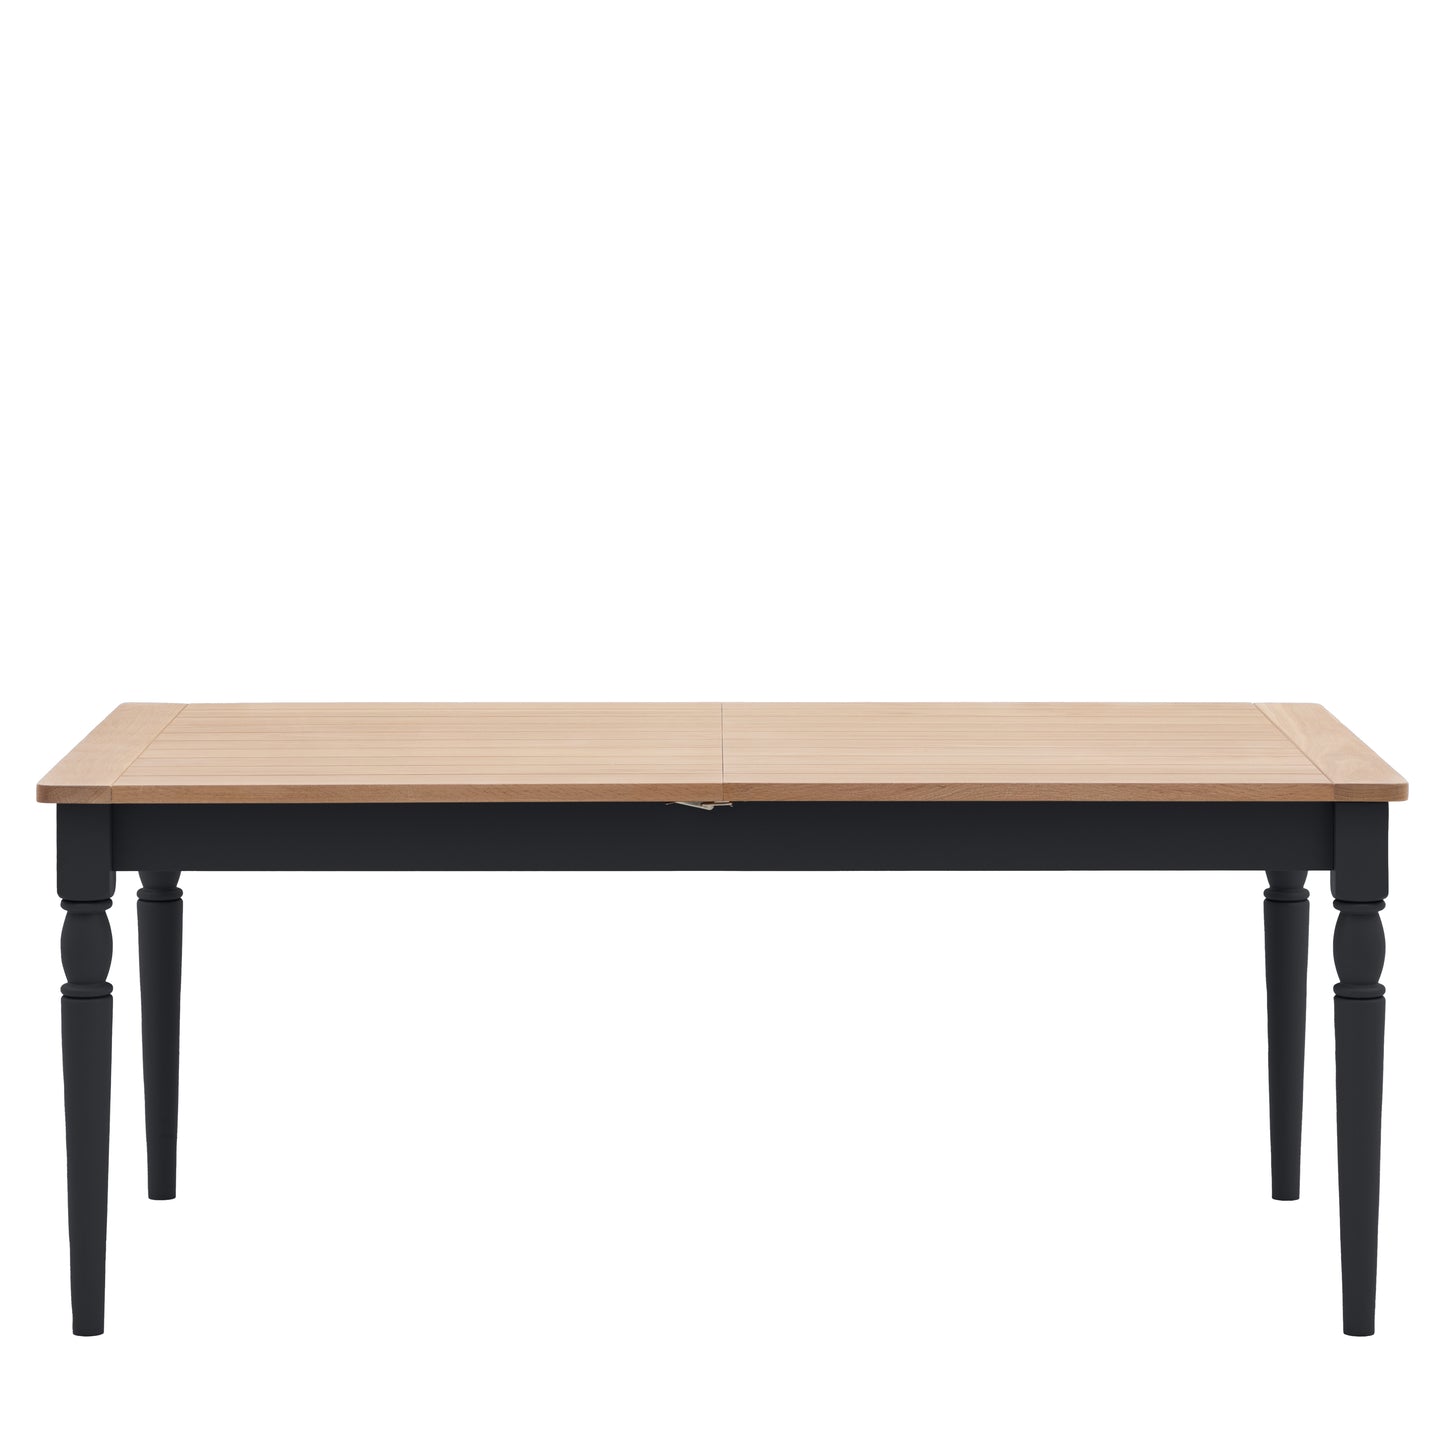 Load image into Gallery viewer, A rectangular meteor dining table with black legs and a black top for interior decor and home furniture.
